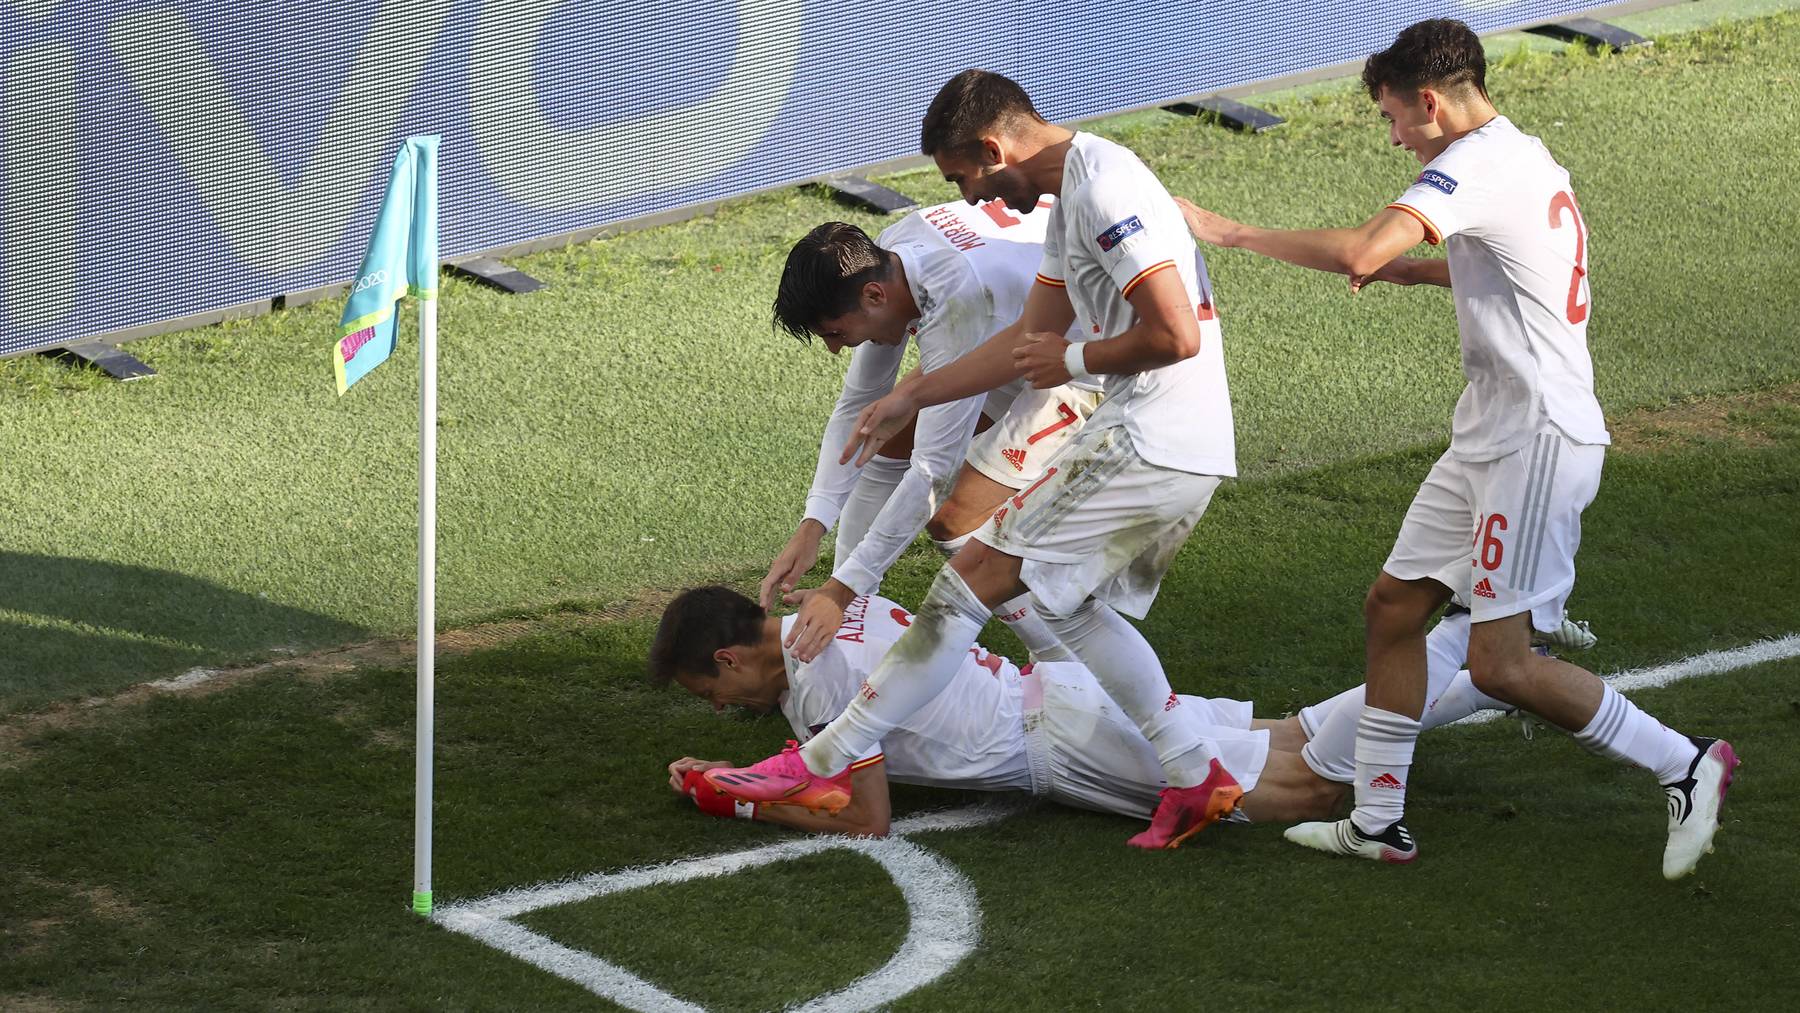 Spain's Cesar Azpilicueta, on the ground, celebrates with his teammates after scored against Croatia during the Euro 2020 soccer championship round of 16 match between Croatia and Spain, at Parken stadium in Copenhagen, Denmark, Monday, June 28, 2021.